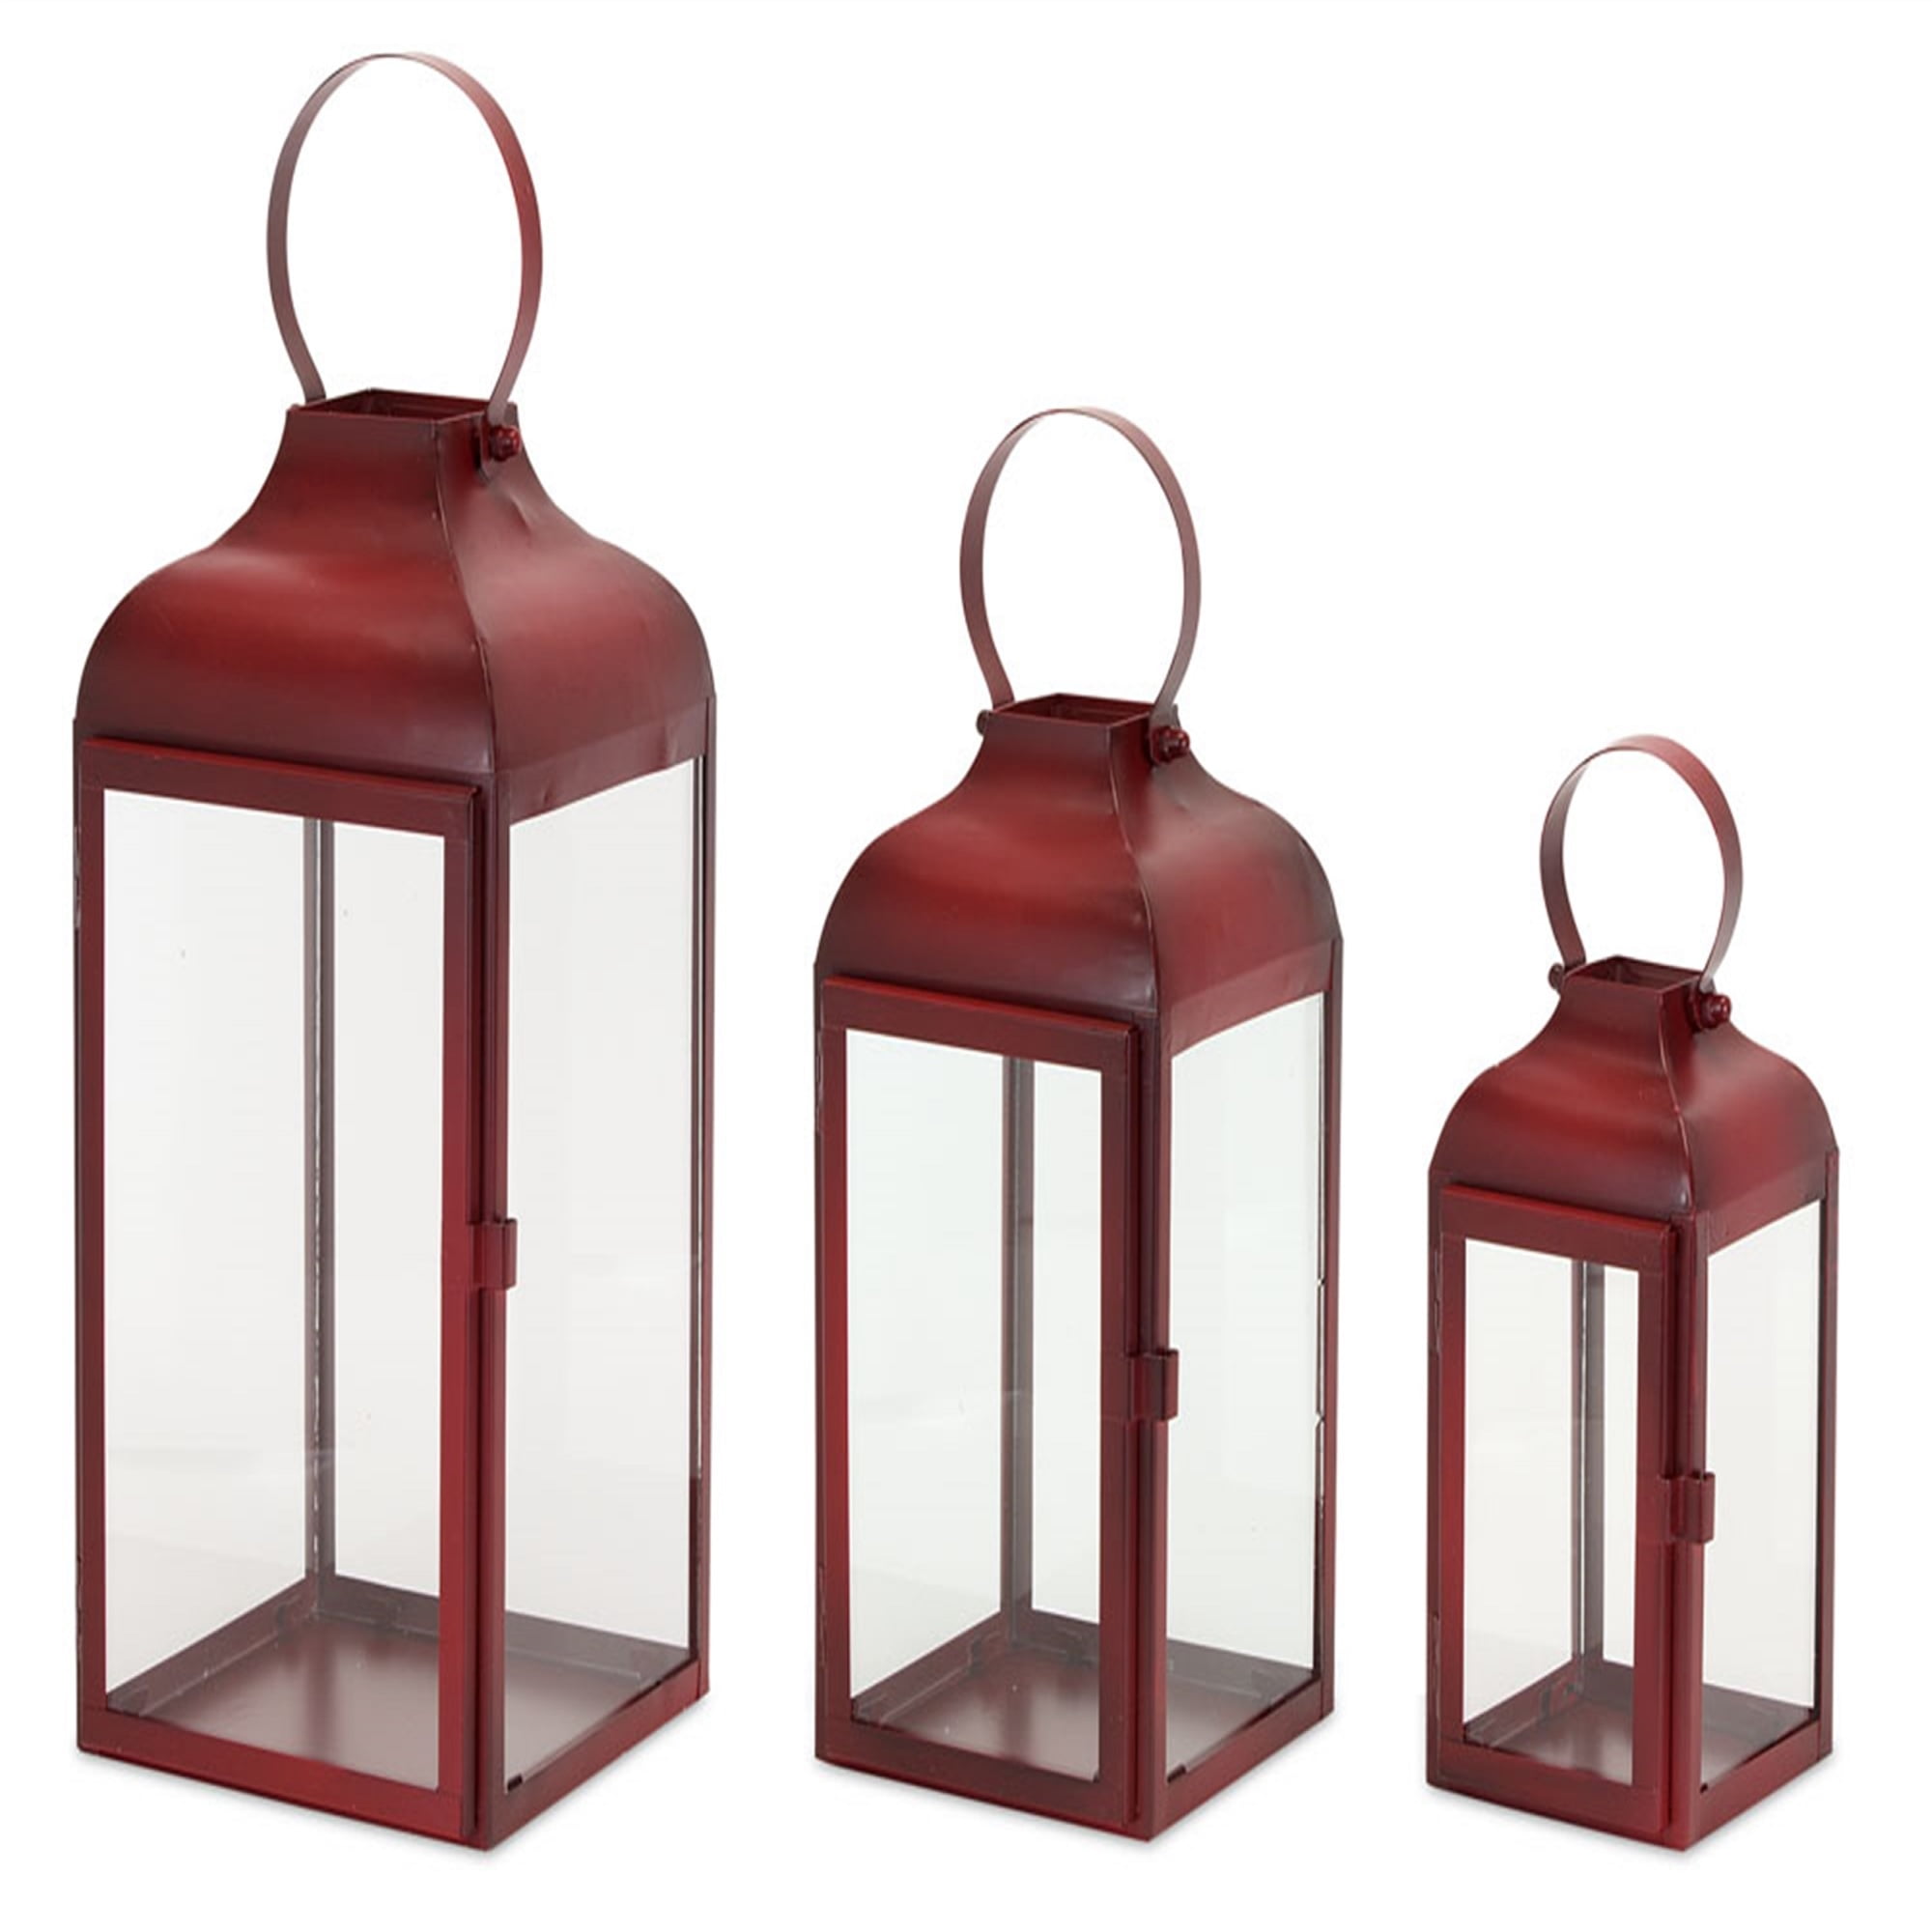 Flameless Lantern Candle-No Flame LED Red Metal and Glass #467913 NEW 